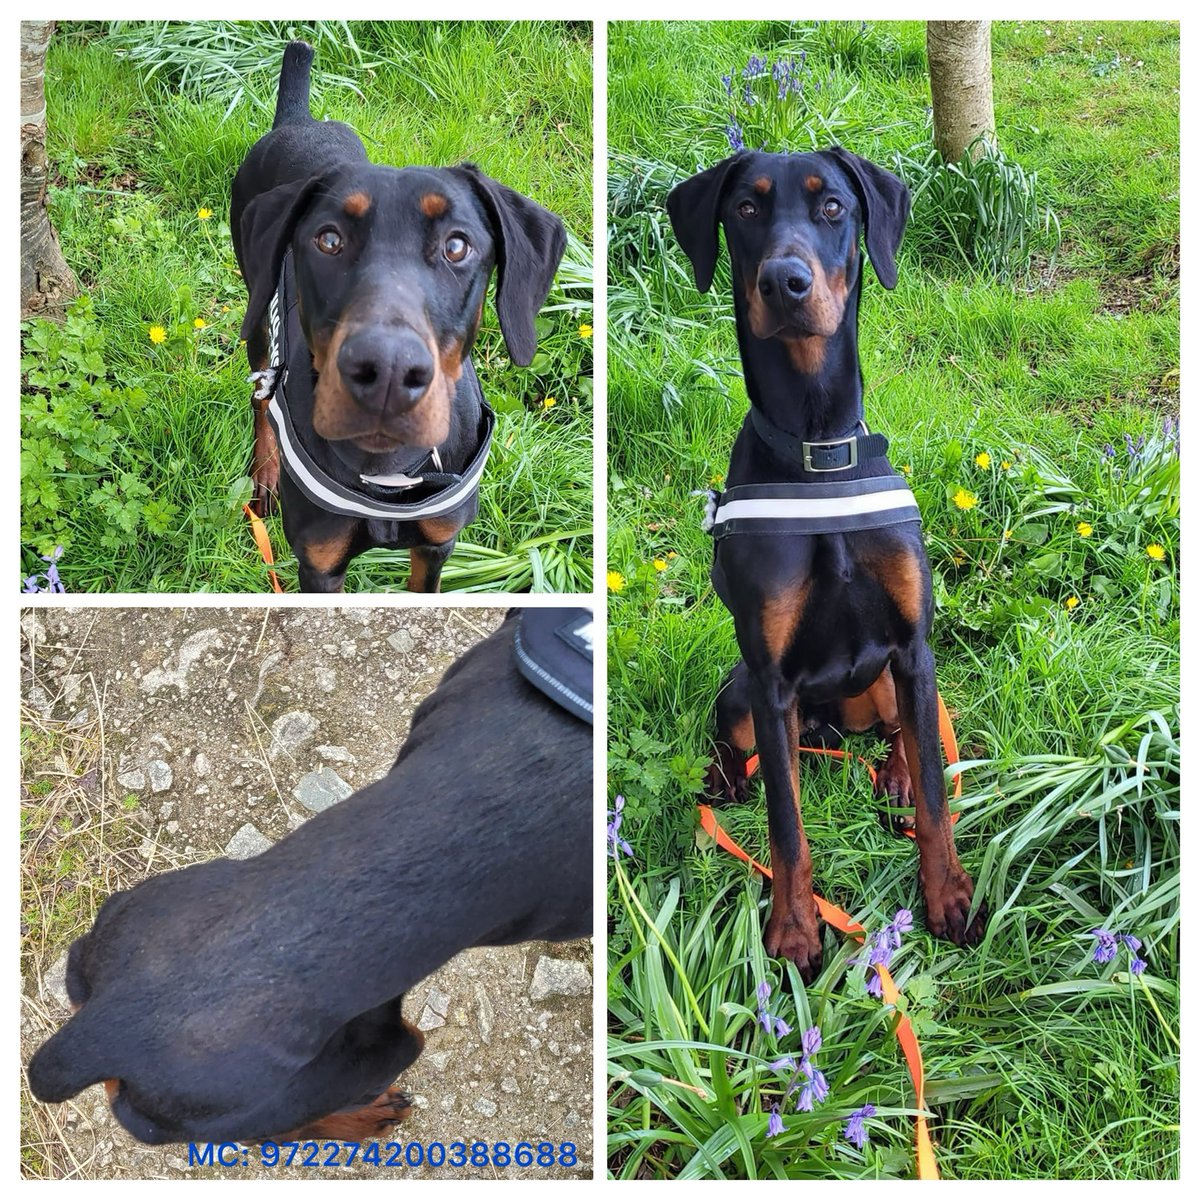 9 mth old Doberman Lorcan arrived to us v underweight-his tail hacked off leaving an open wound He’s now on the road to recovery, gaining trust with our gentle kennel team who are working quietly to build his confidence 💙 Madra.ie #AdoptDontShop #AnimalCruelty